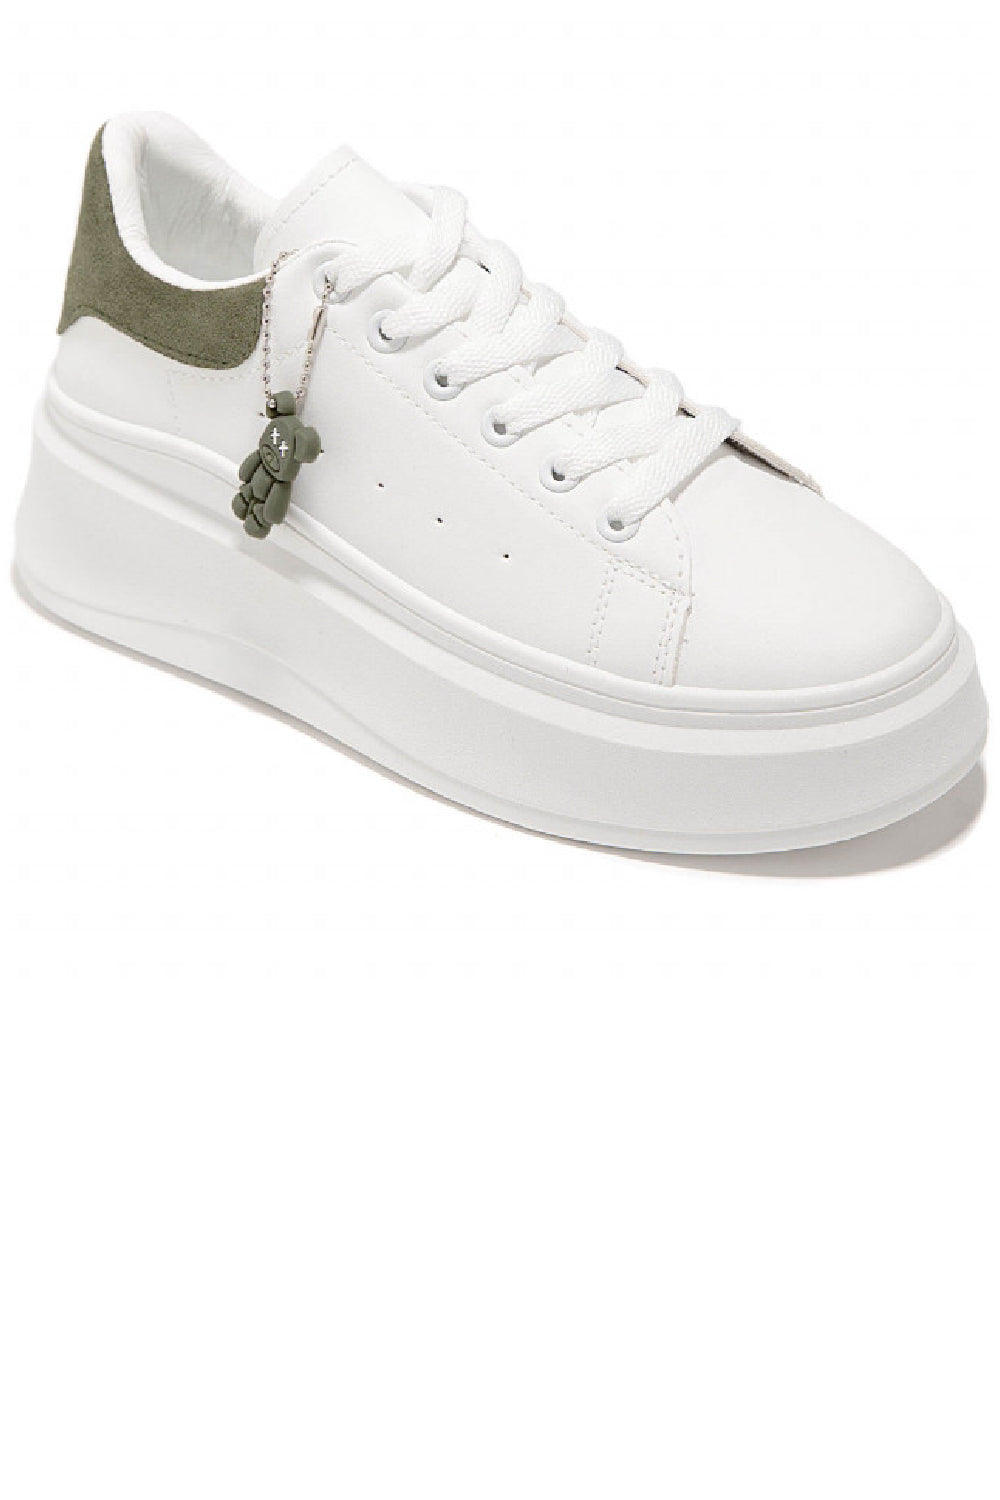 GREEN LACE UP TAB DETAIL CHUNKY FLAT TRAINERS SNEAKERS